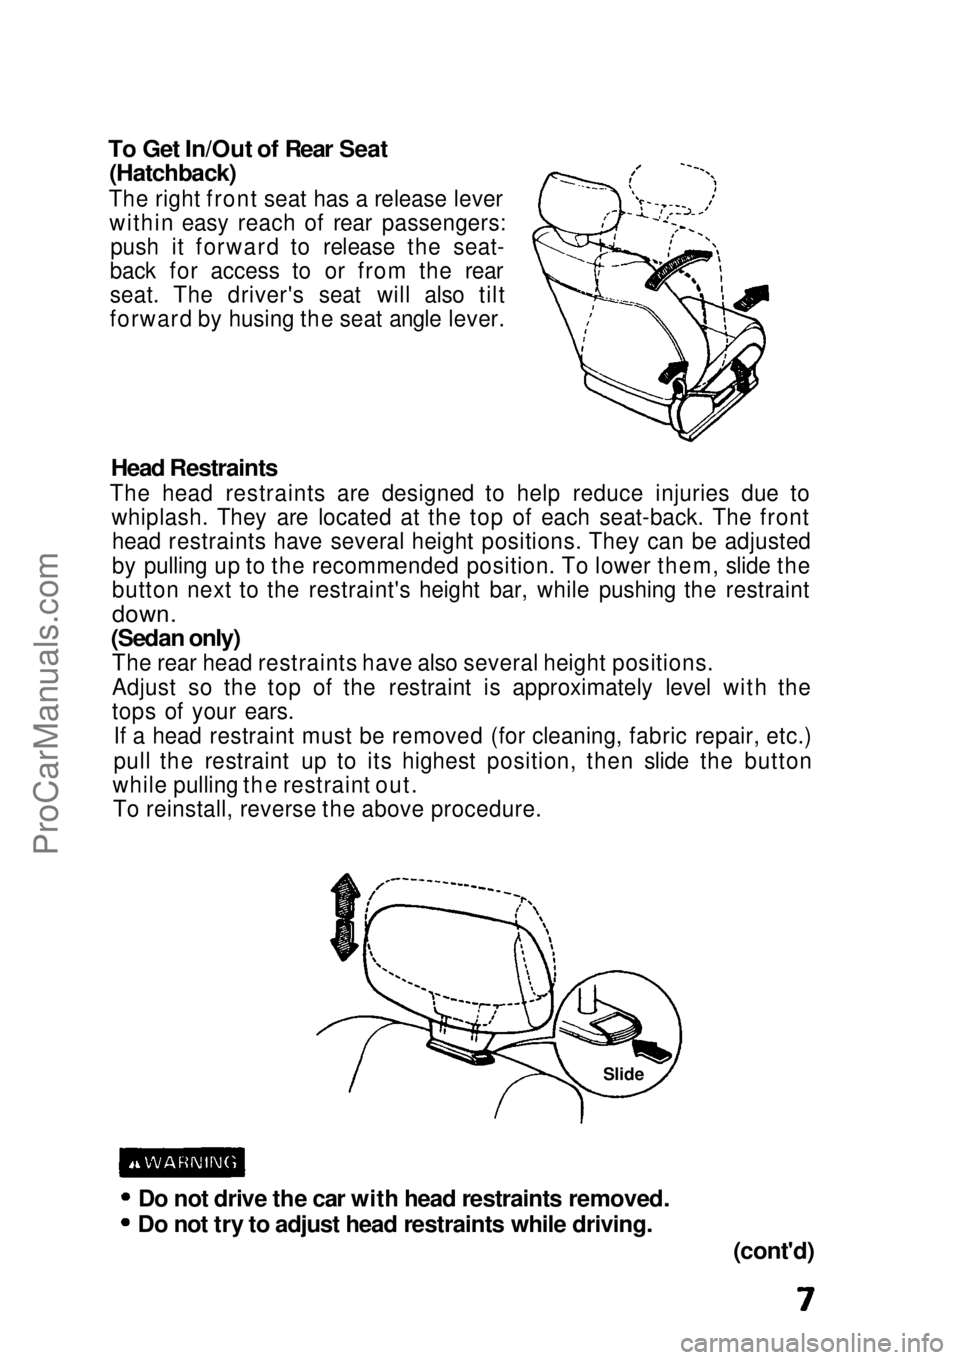 HONDA CIVIC 1991  Owners Manual 
To Get In/Out of Rear Seat

(Hatchback)

The right front seat has a release lever within easy reach of rear passengers: push it forward to release the seat-
back for access to or from the rear
seat. 